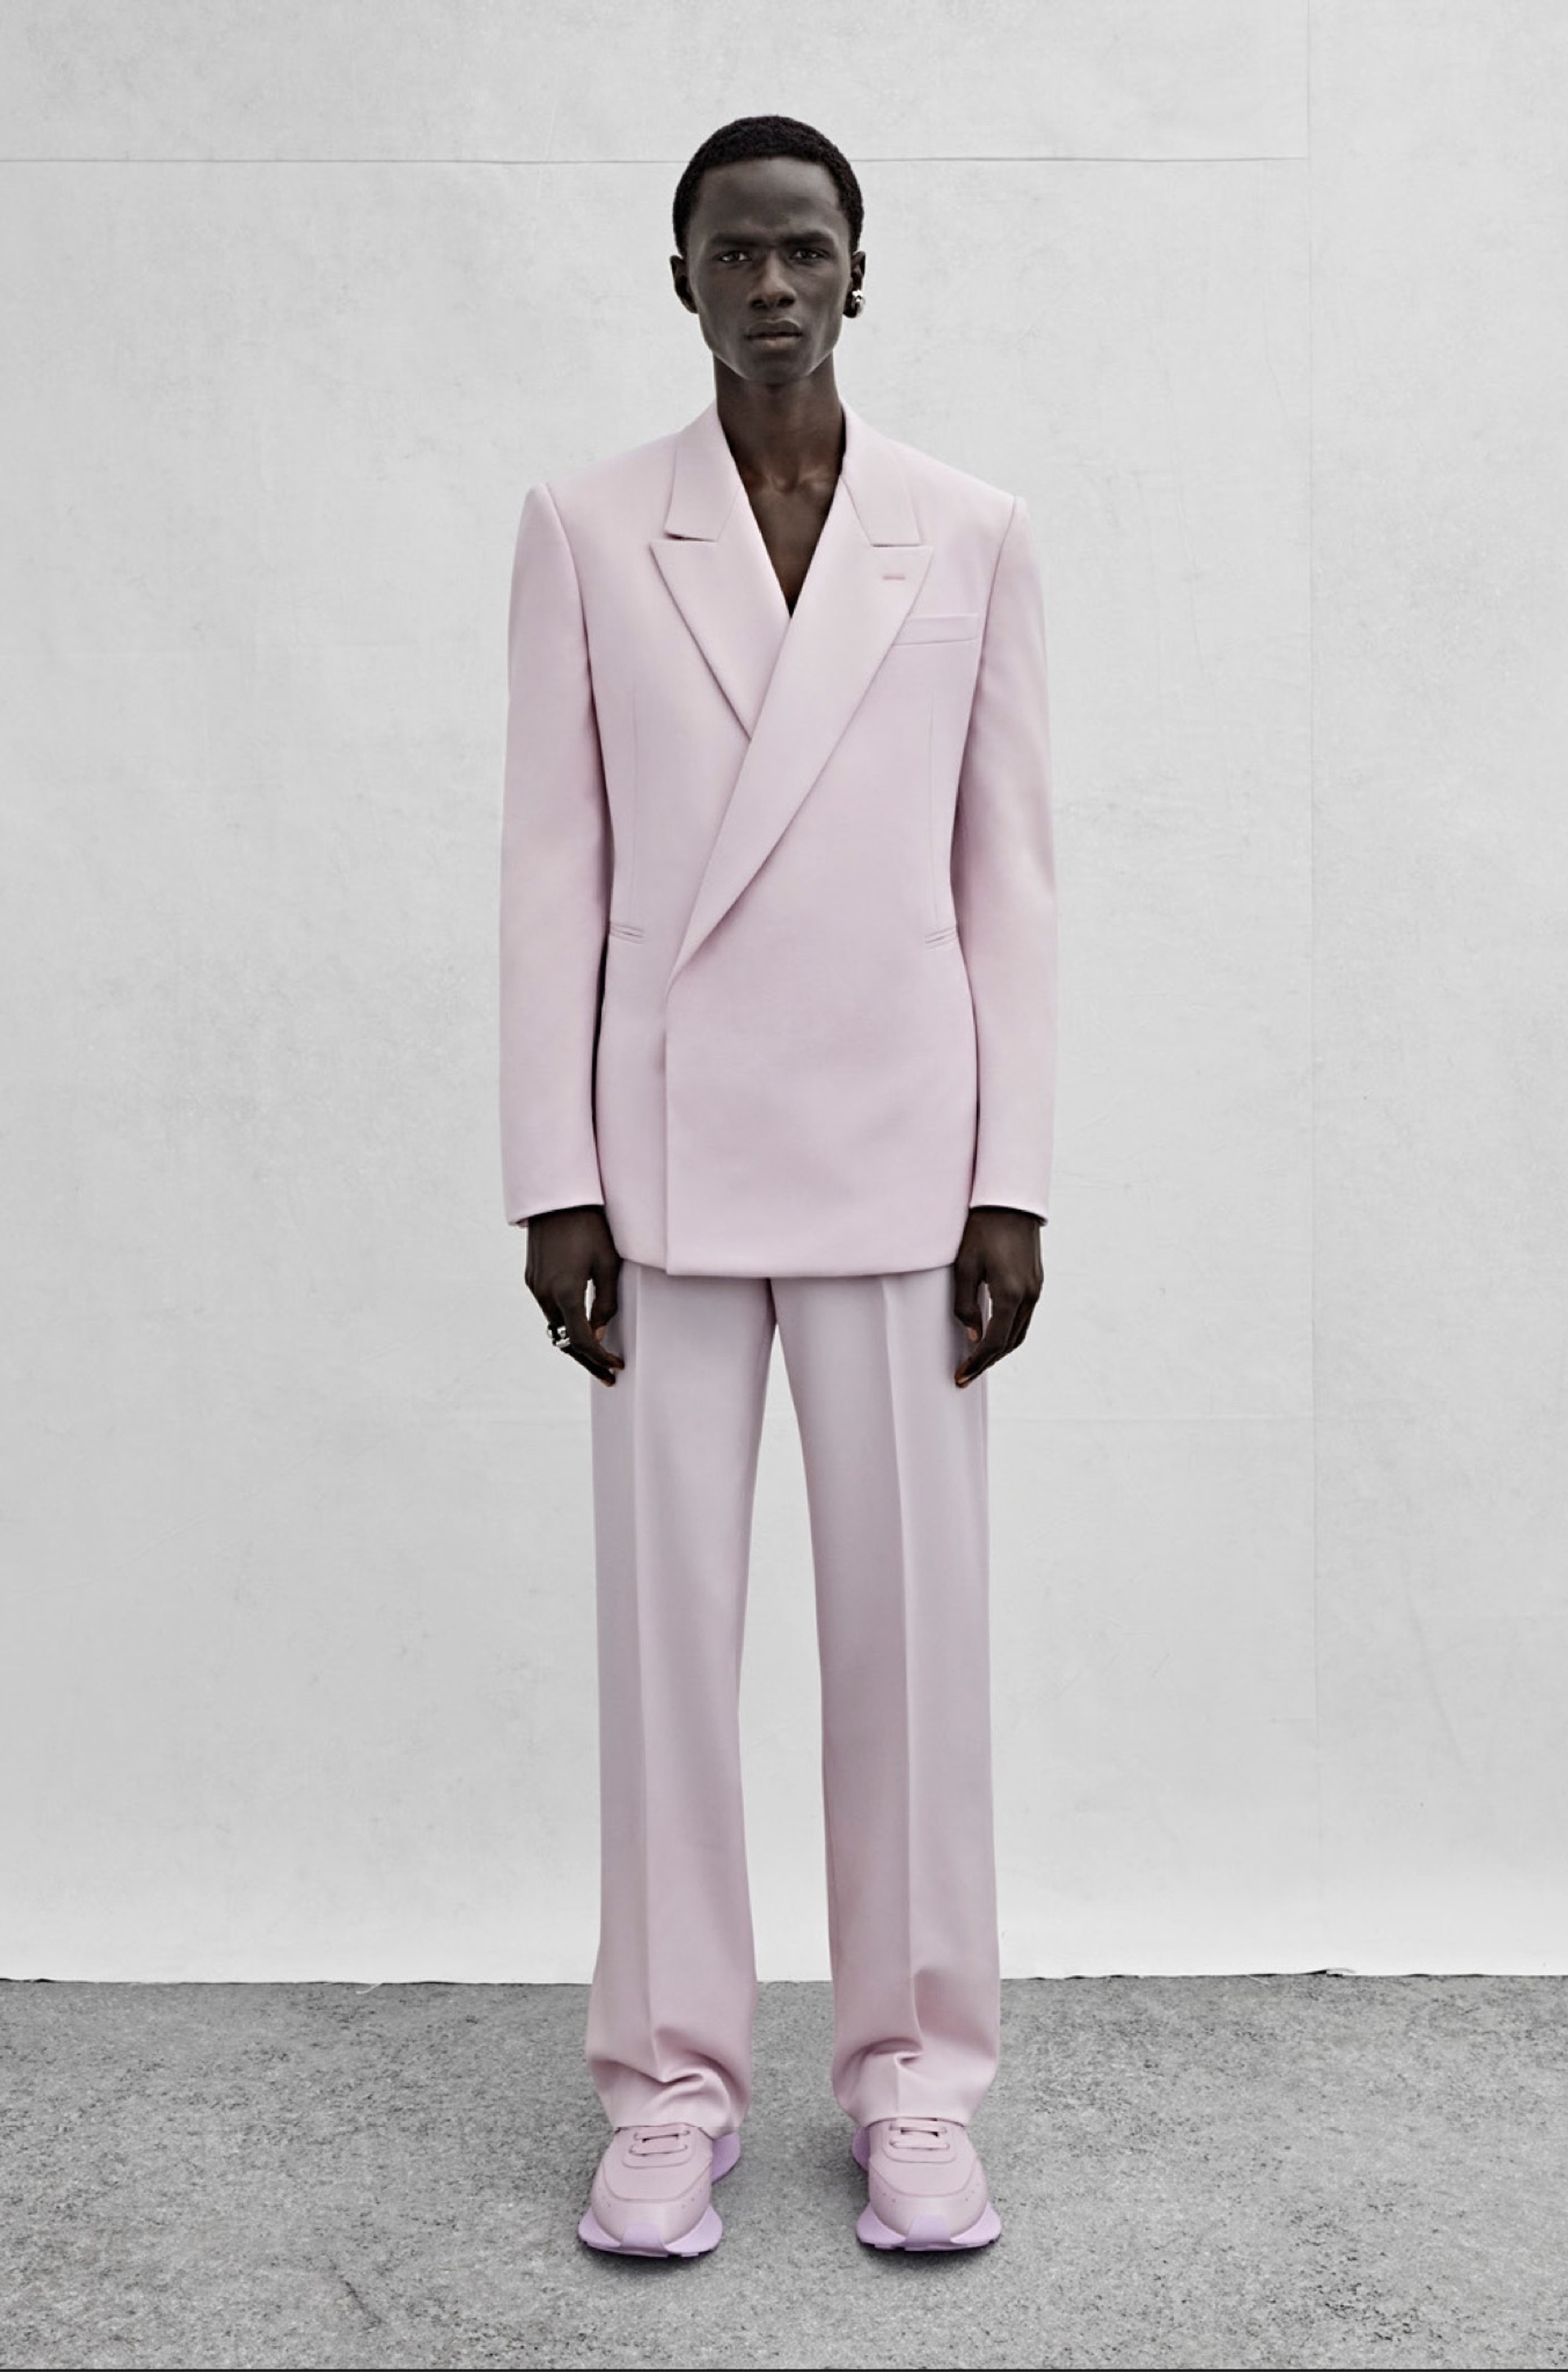 A double-breasted tailored jacket and wide-legged trousers in pale lilac grain de poudre.